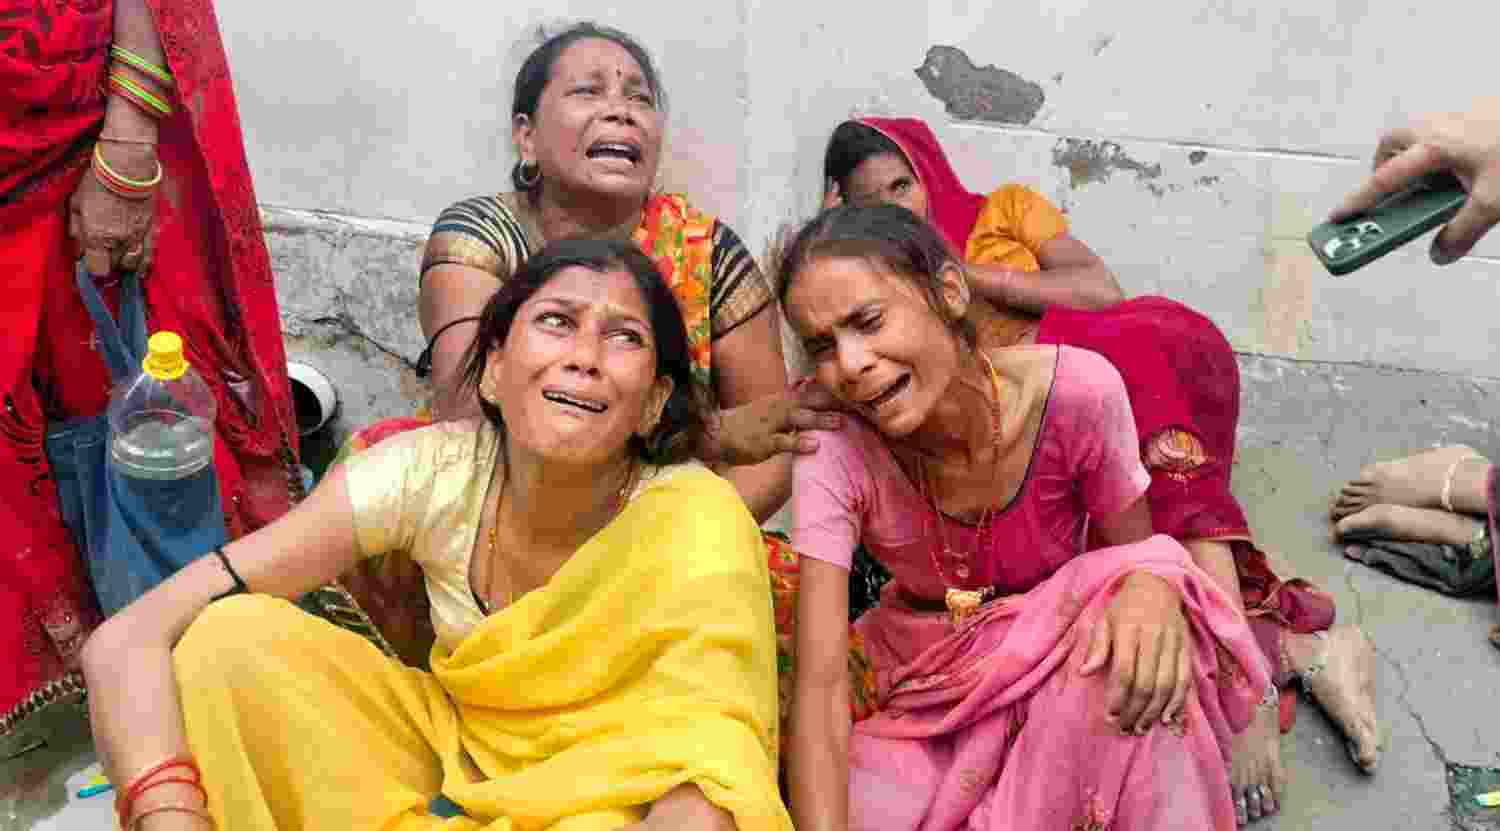 Hathras stampede: Bodies on ice, relatives search for loved ones